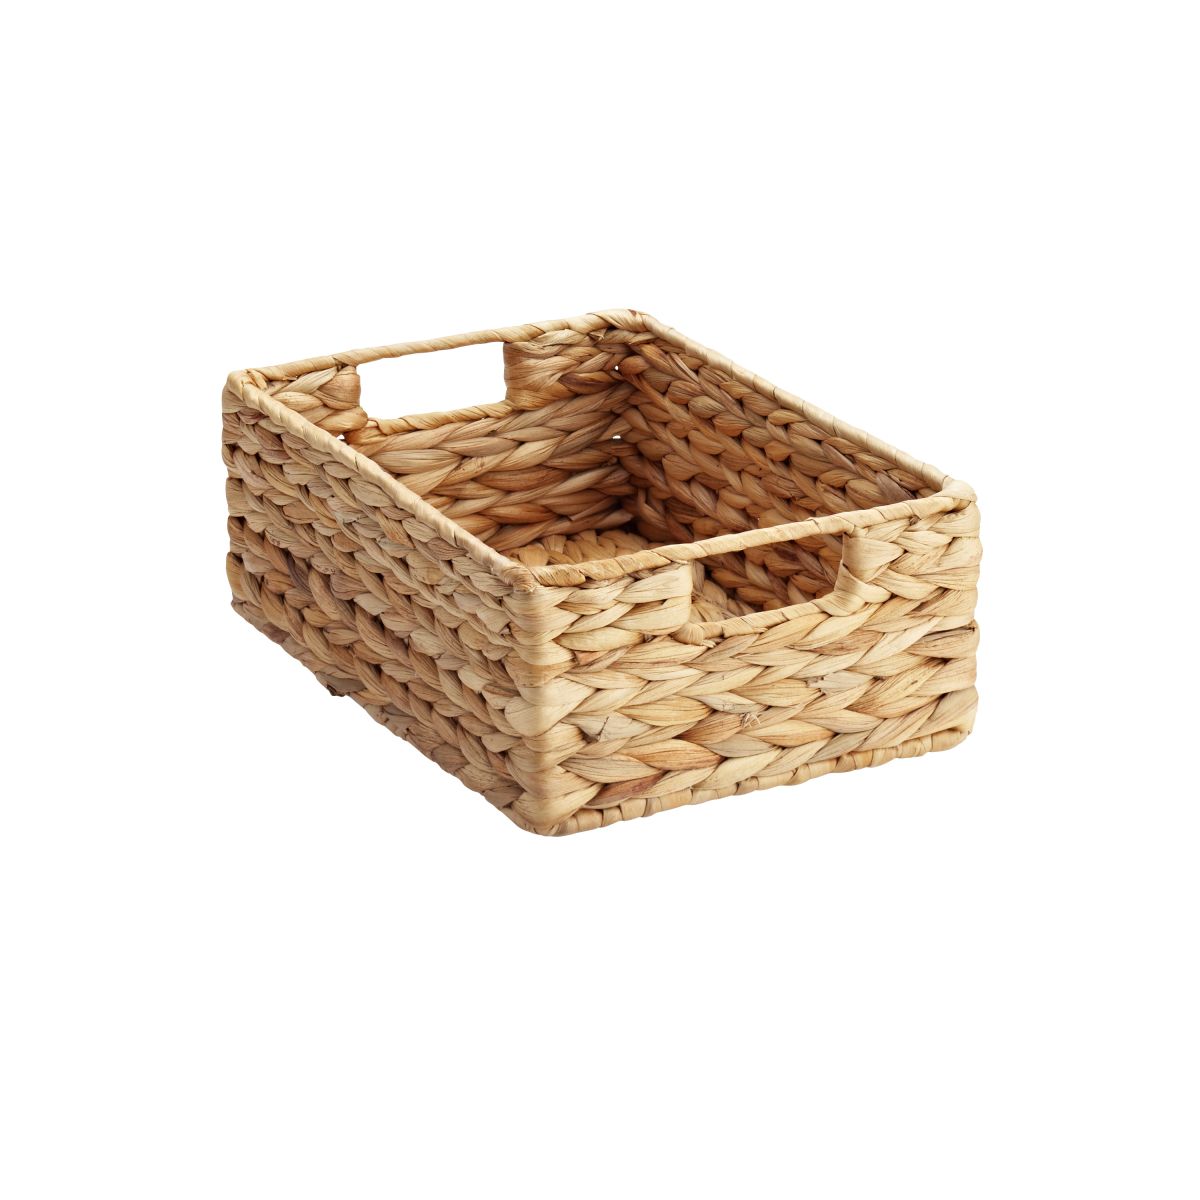 Water Hyacinth Bin | The Container Store